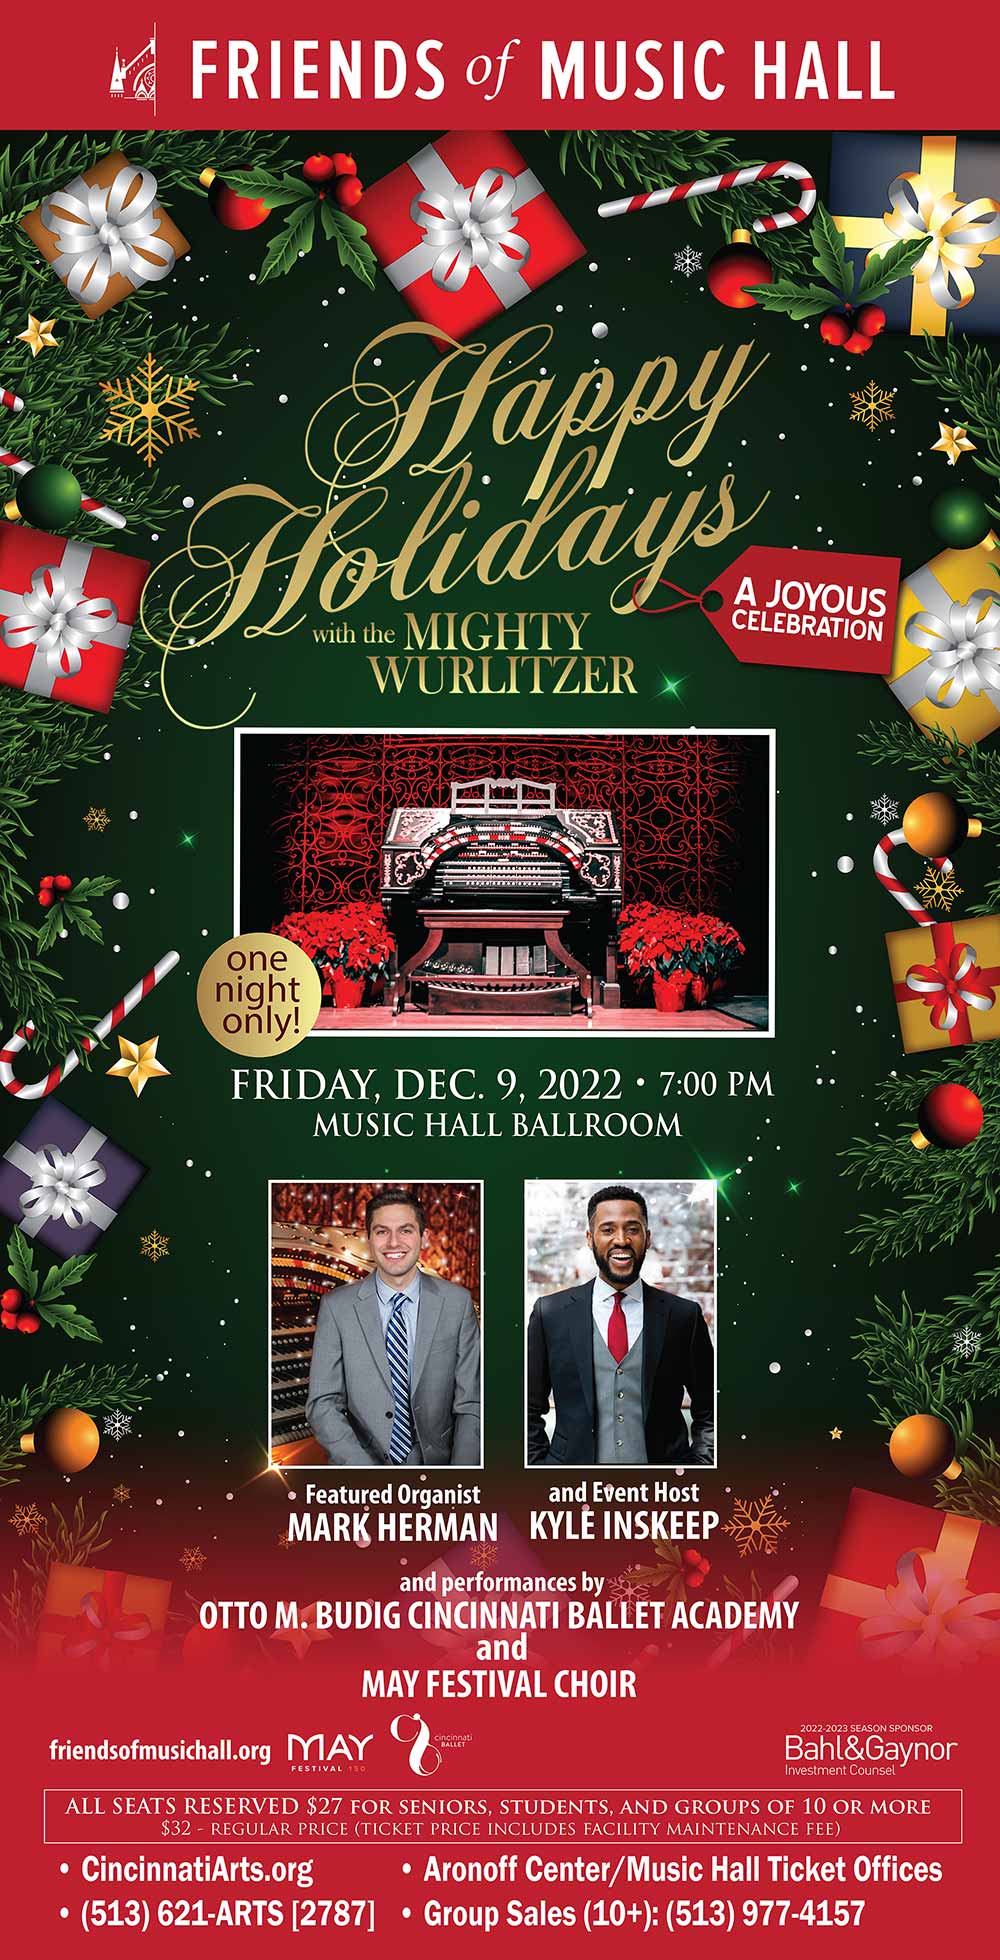 Happy Holidays with the Mighty Wurlitzer December 9, 2022, in the Music Hall Ballroom